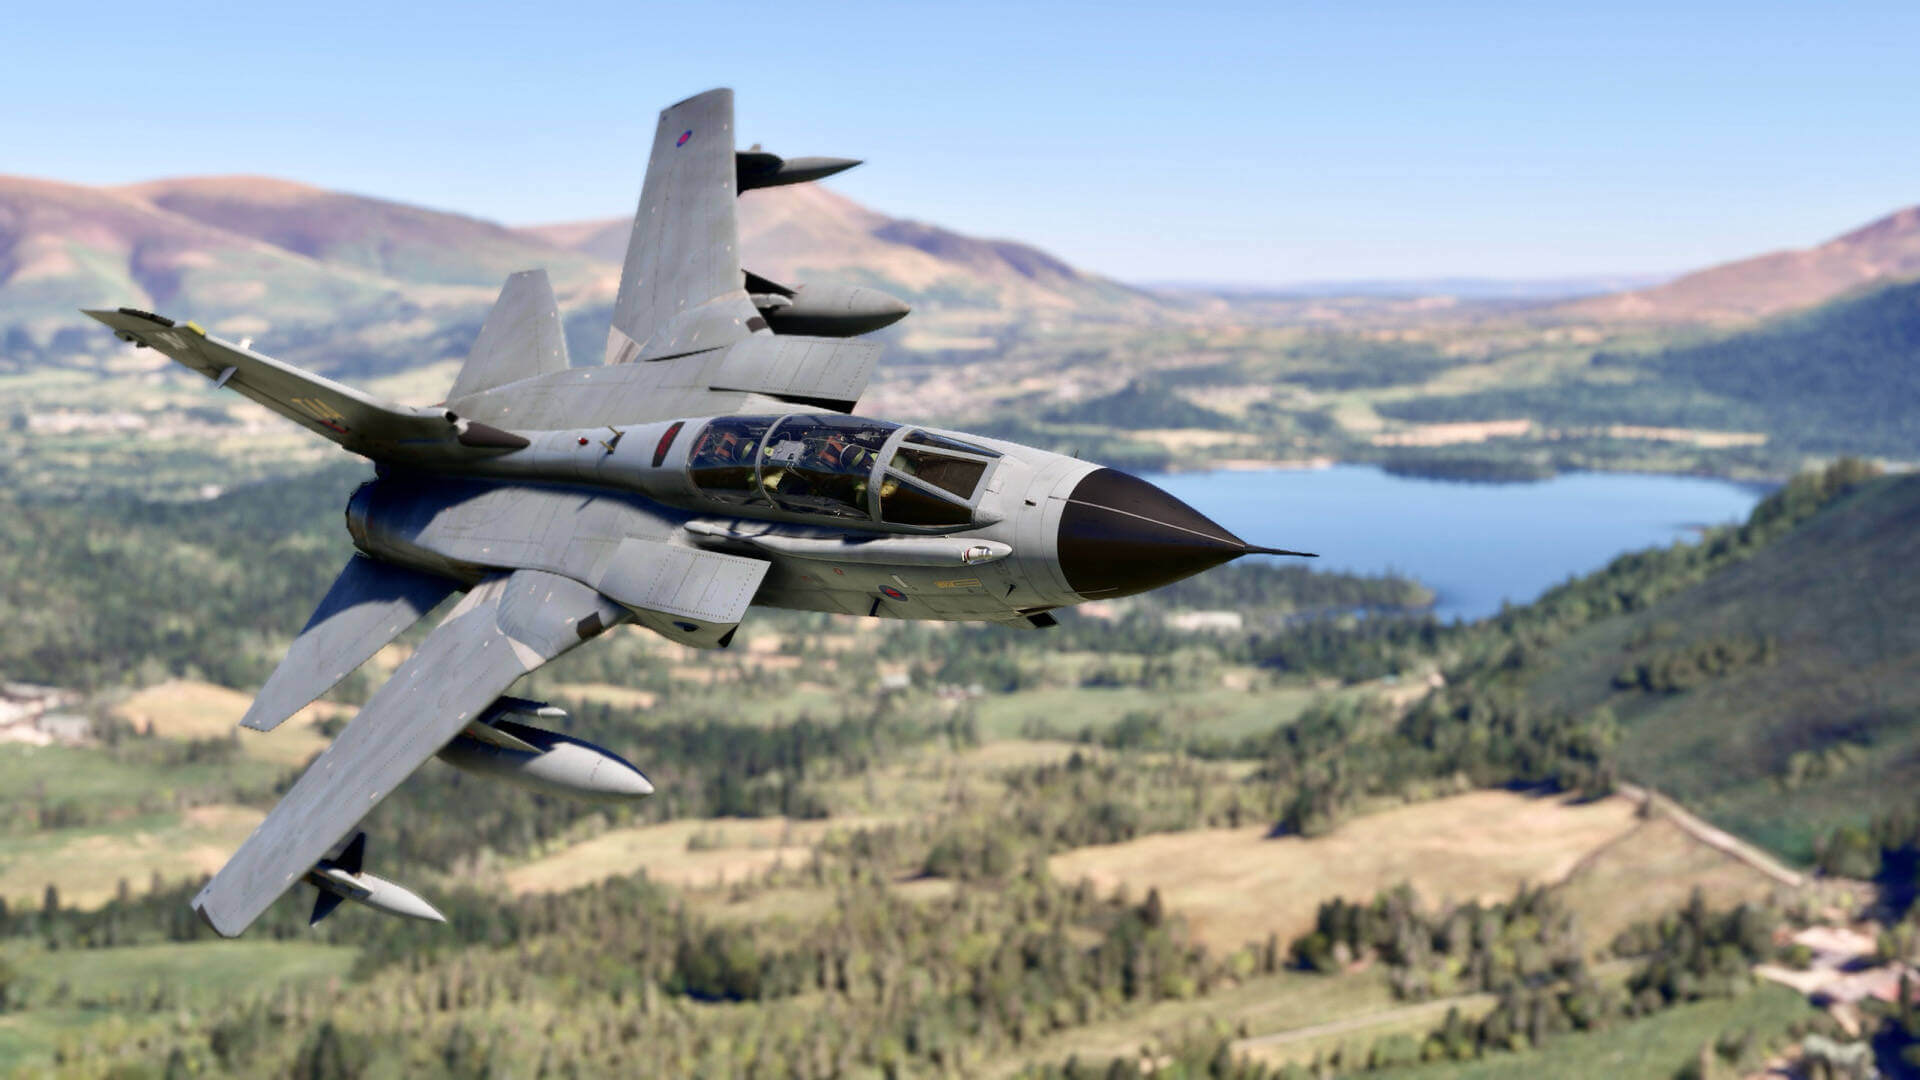 A Tornado fighter jet with wings spread banks sharply to the right whilst flying at low altitude in a valley